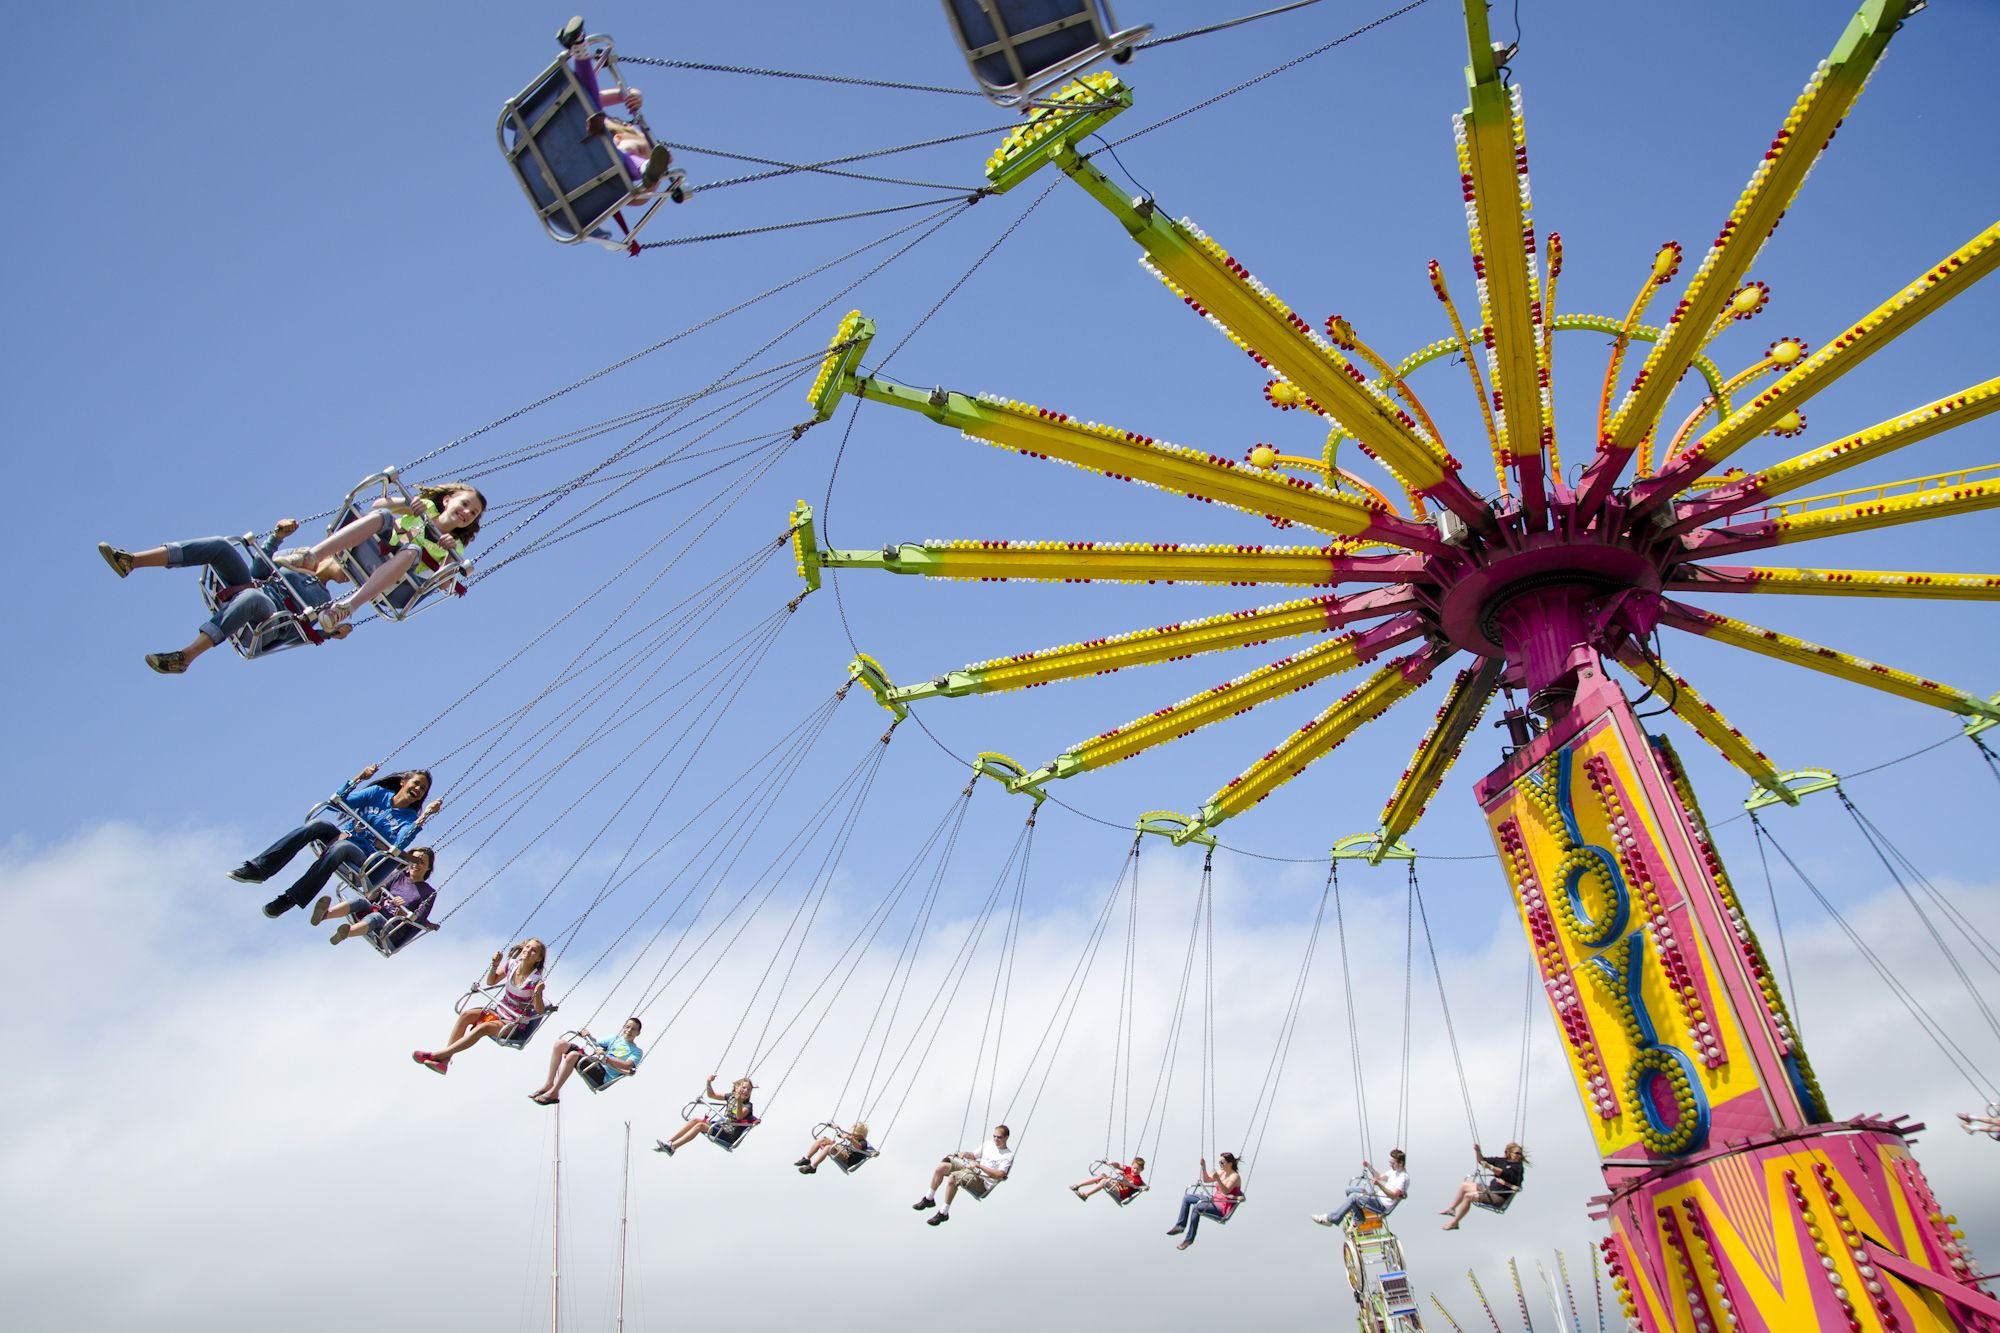 The Clark County Fair drew 251,892 people during its 10-day run this summer.